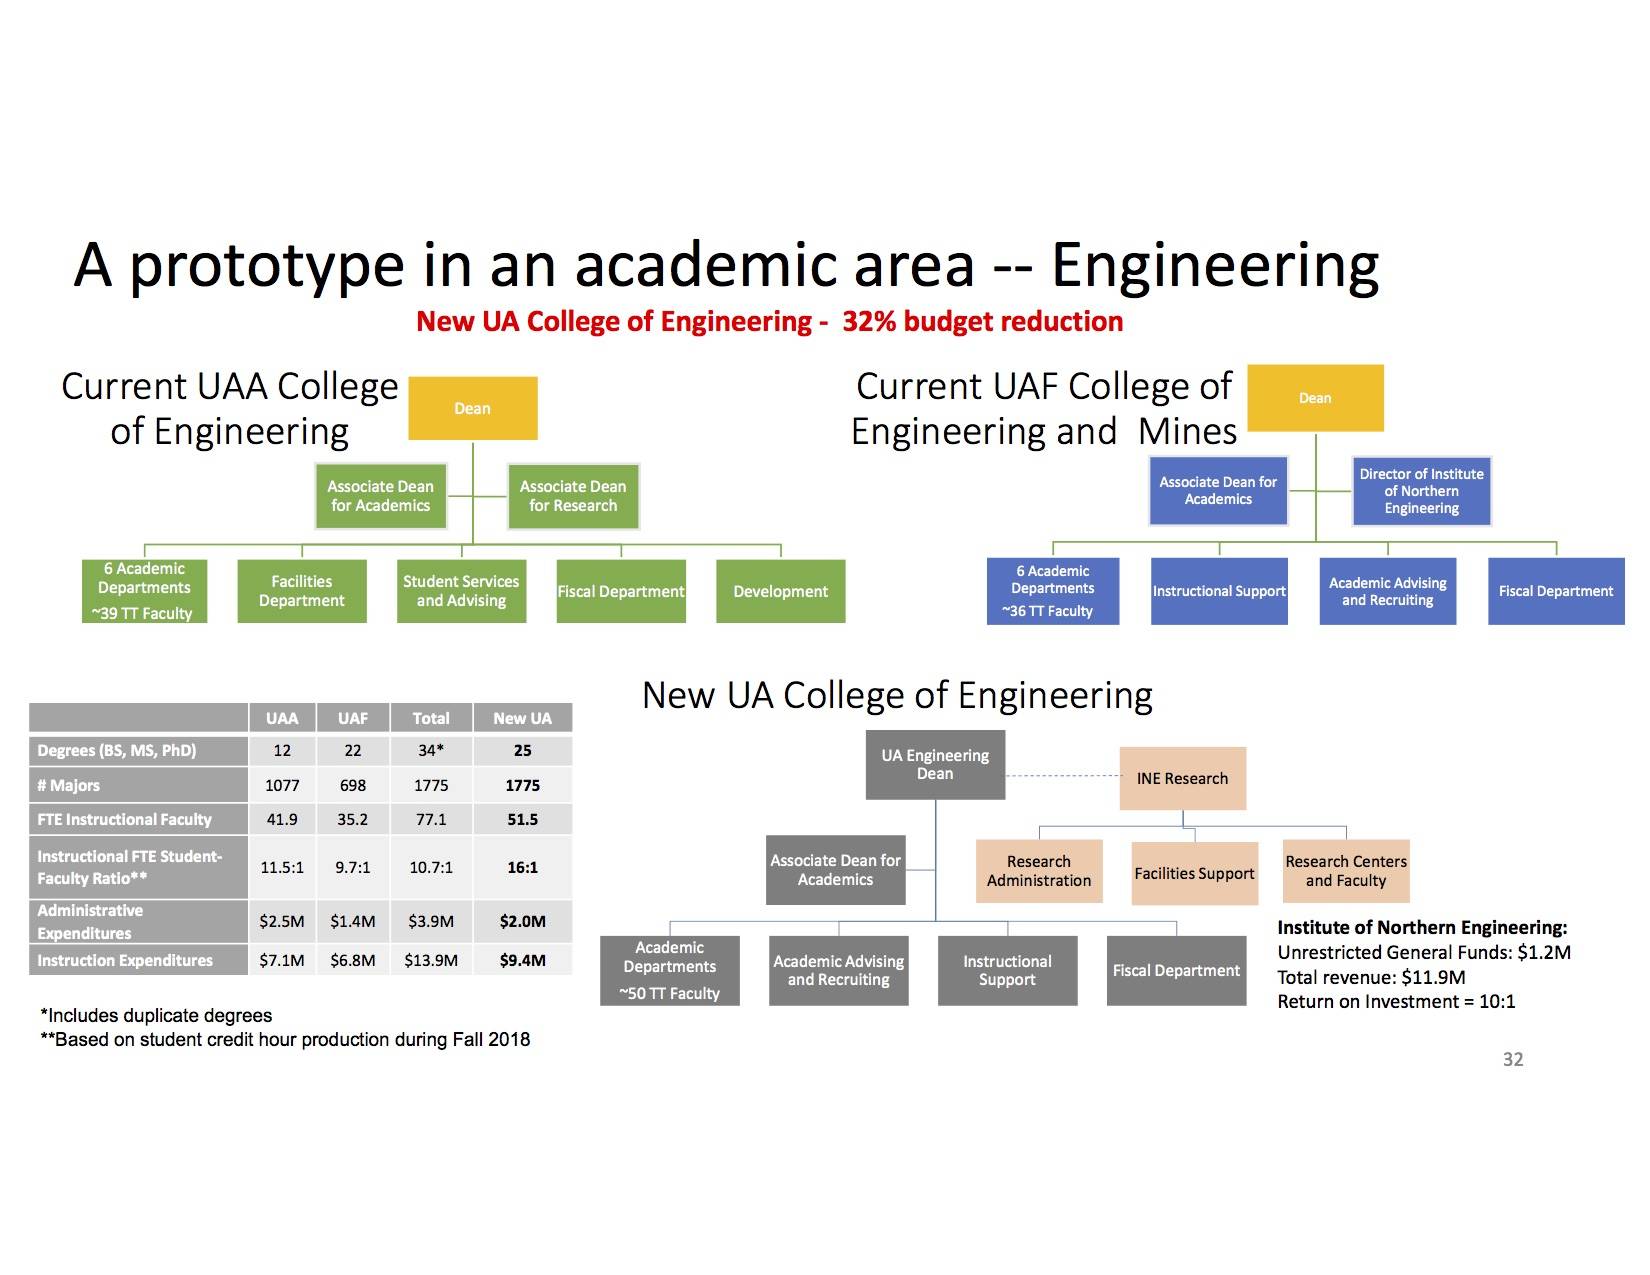 A slide from the Board of Regents presentation showing potential academic program structures. July 30, 2019.